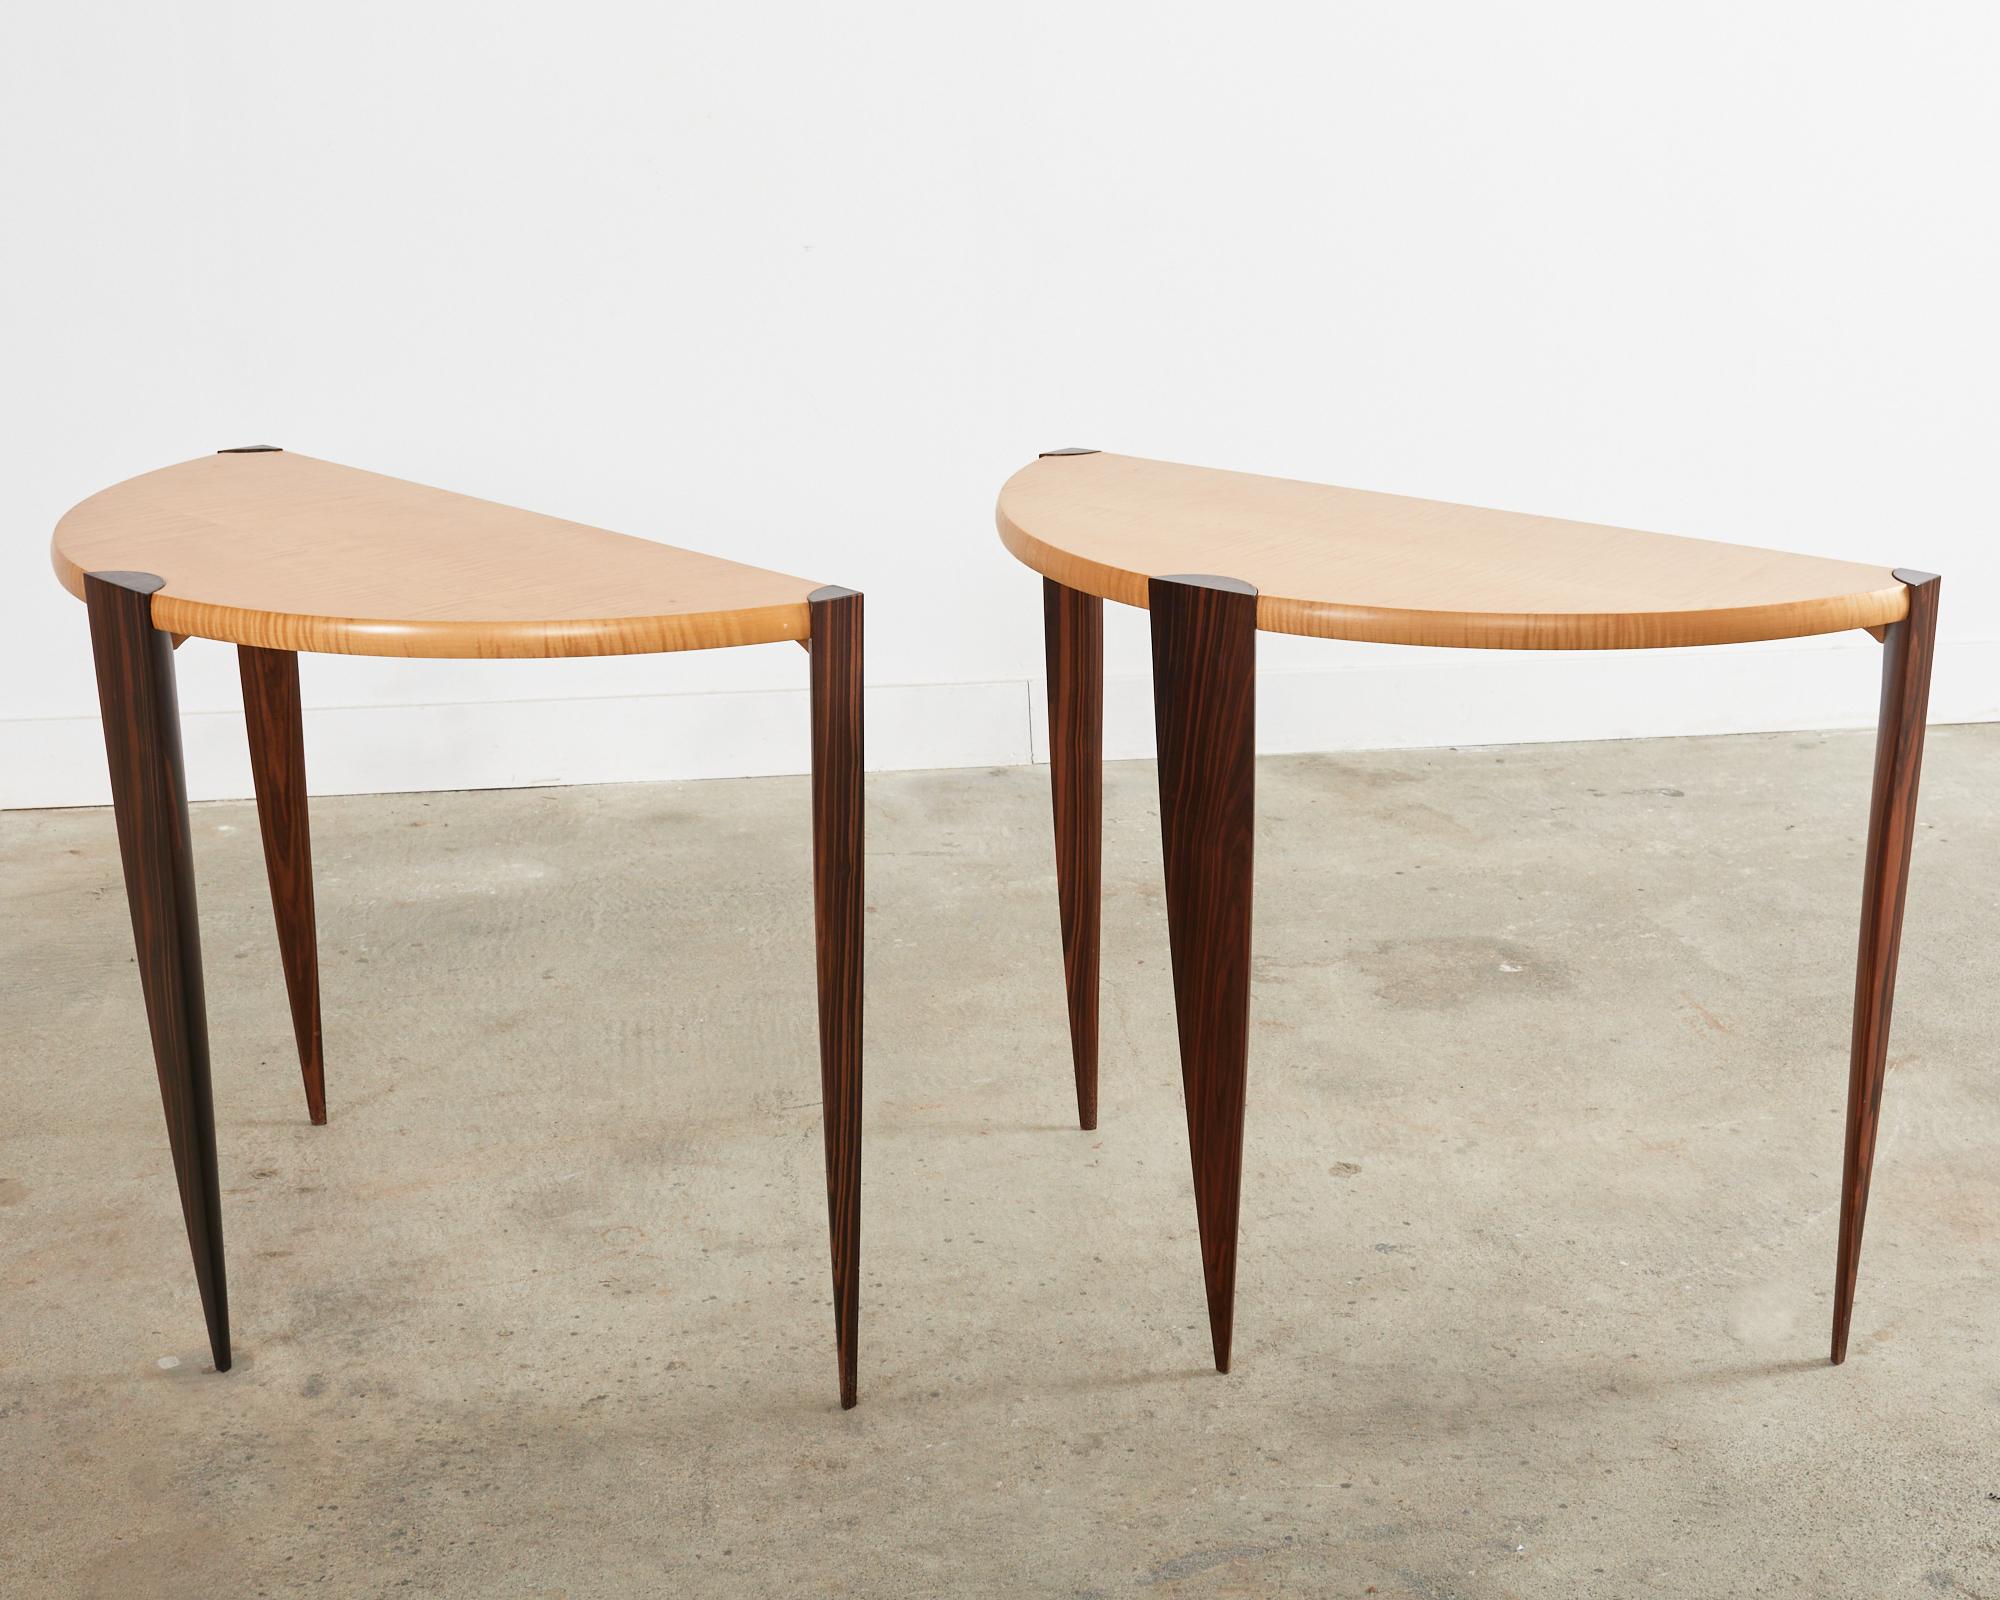 Hand-Crafted Pair of Post Modern Ebony and Birch Demilune Console Tables For Sale